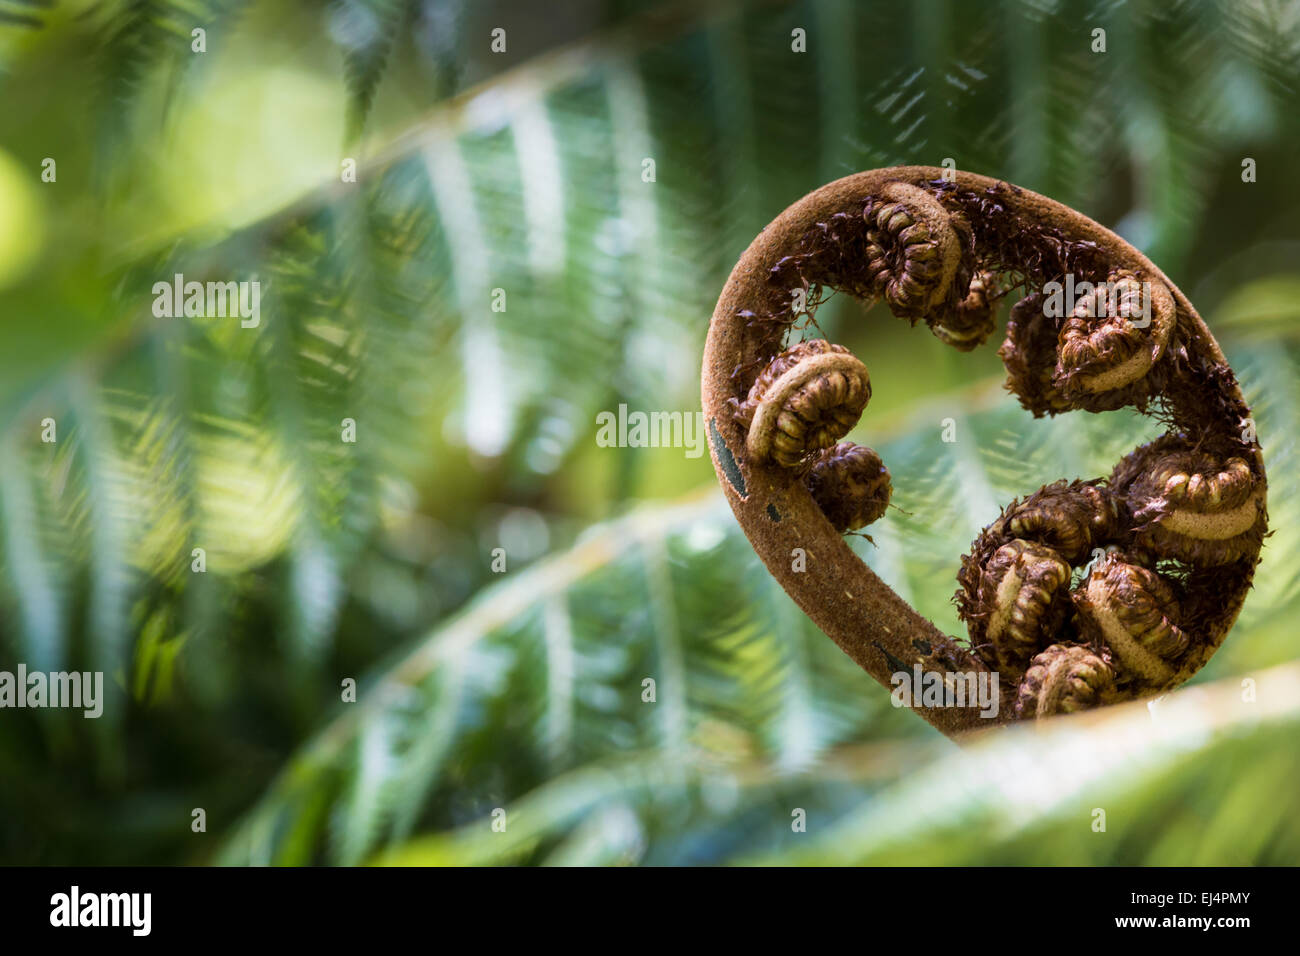 Unravelling fern frond closeup, one of New Zealand symbols Stock Photo